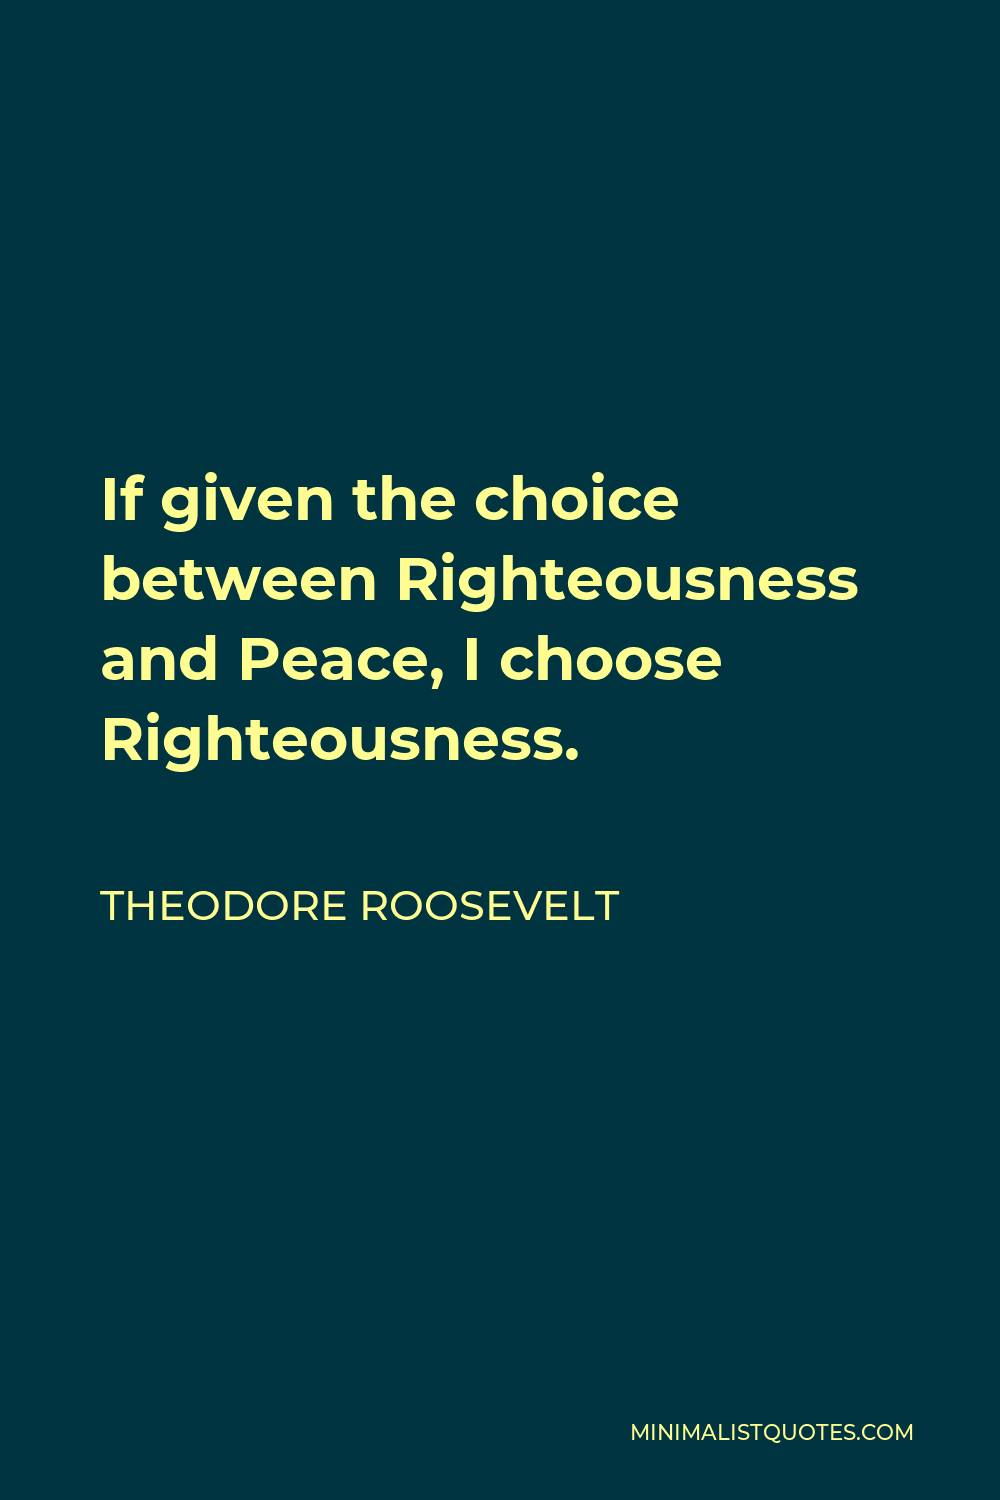 Theodore Roosevelt Quote - If given the choice between Righteousness and Peace, I choose Righteousness.